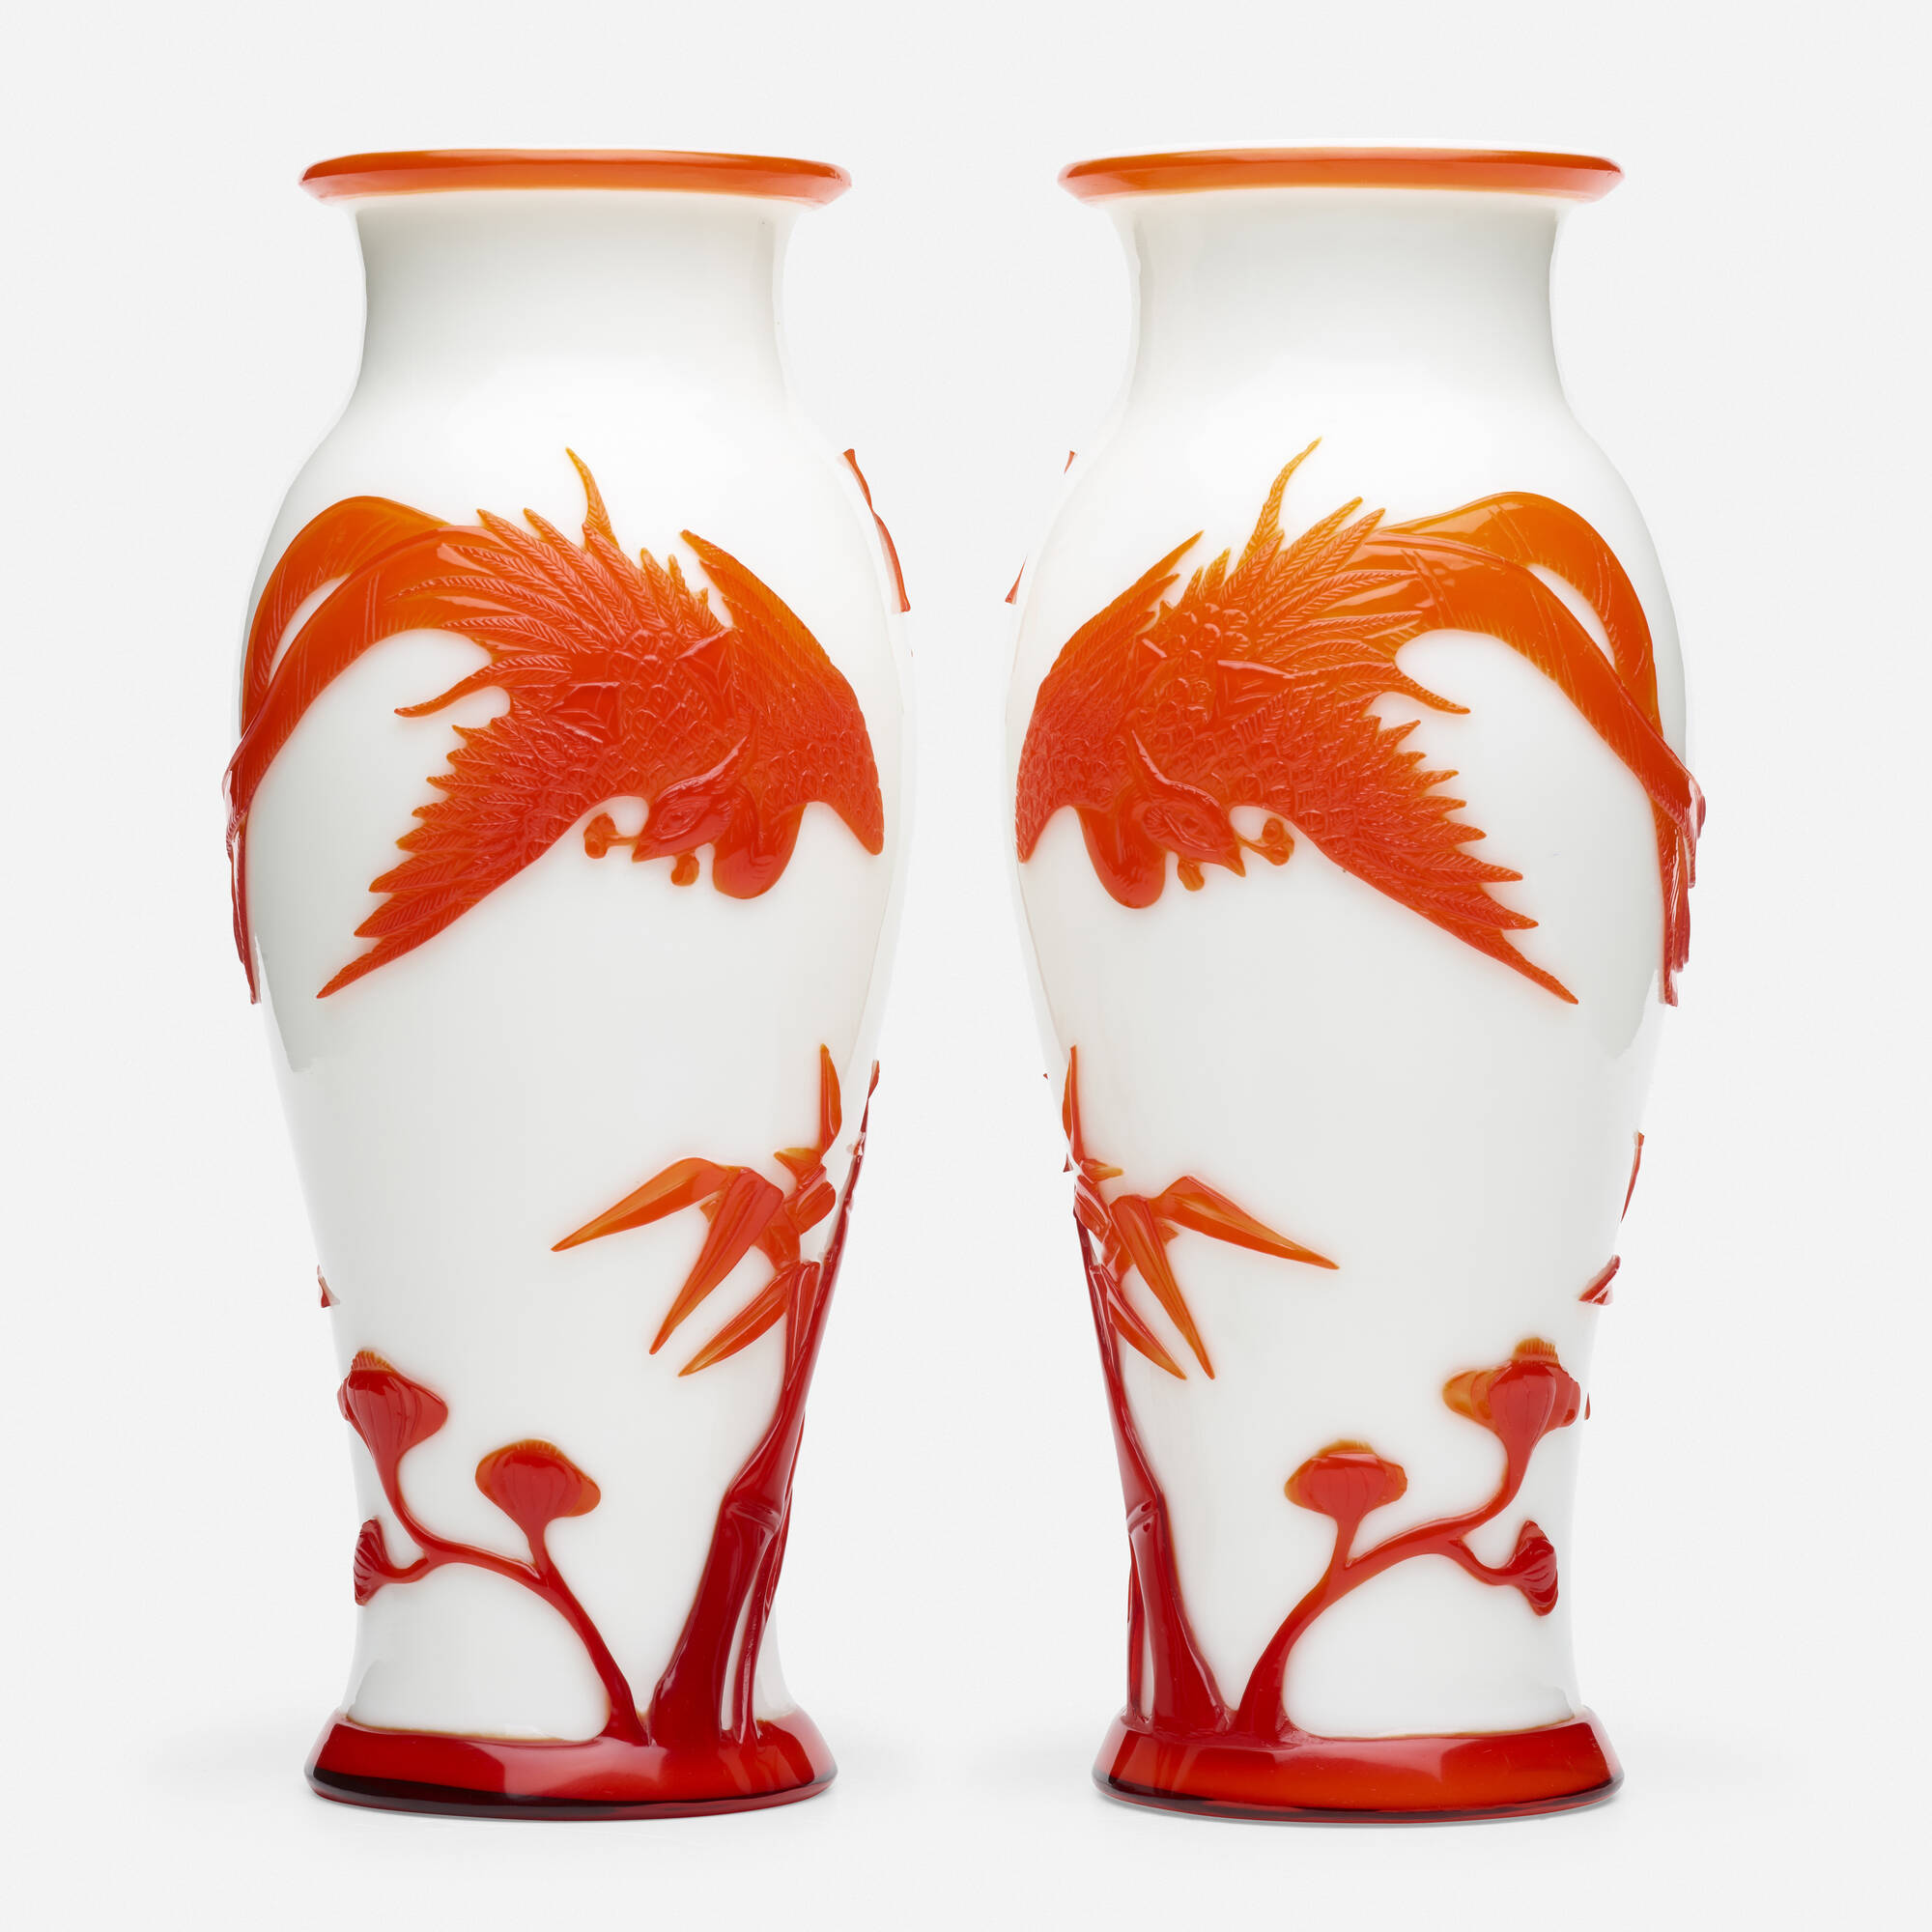 308: CHINESE, Peking glass vases with red pair < Asian Arts, 26 August 2020 < Auctions | Auctions